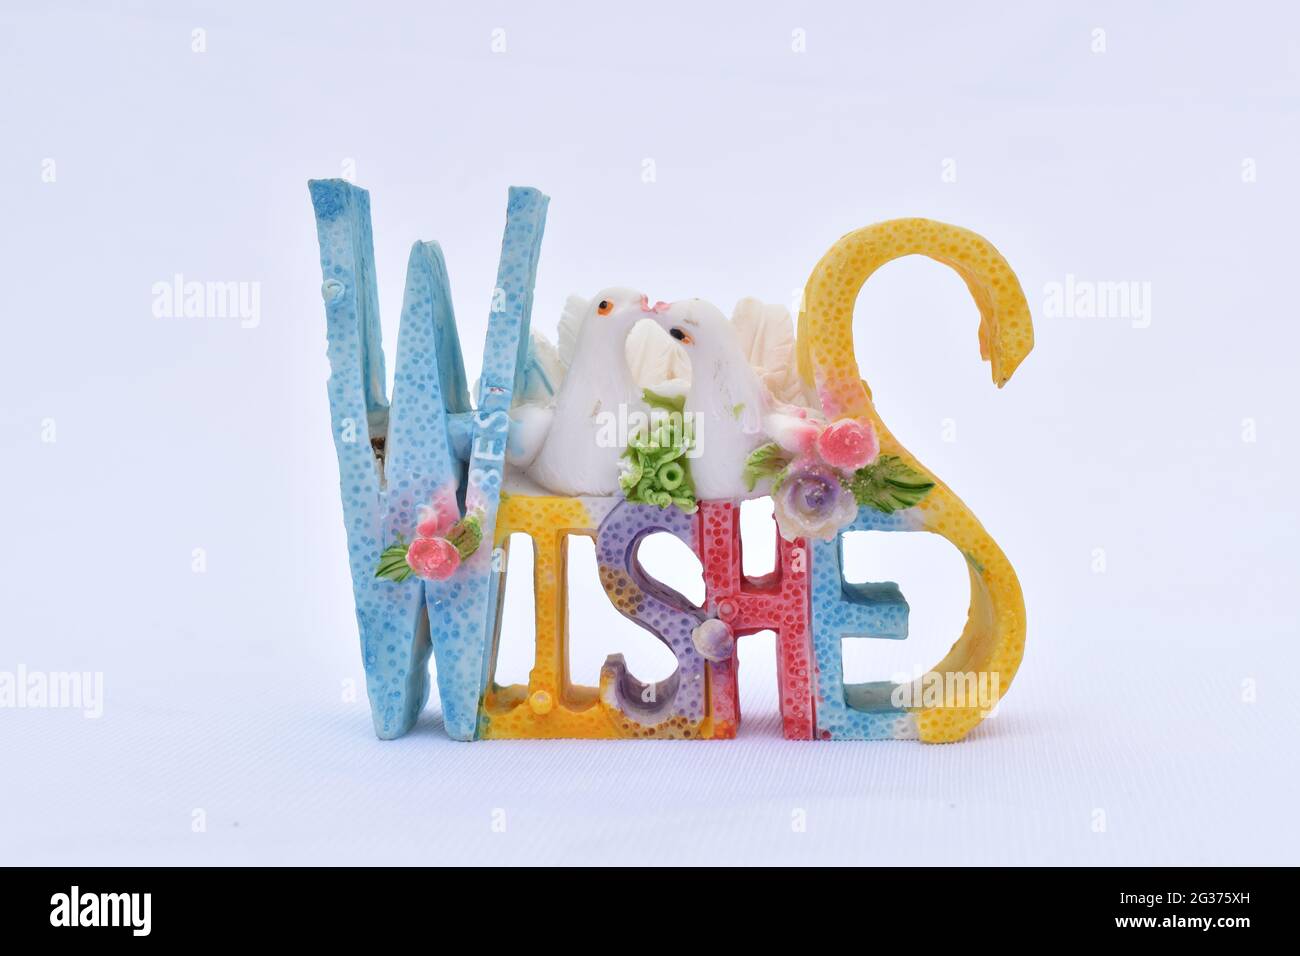 Closeup shot of Best Wishes with doves figurine isolated on white background Stock Photo